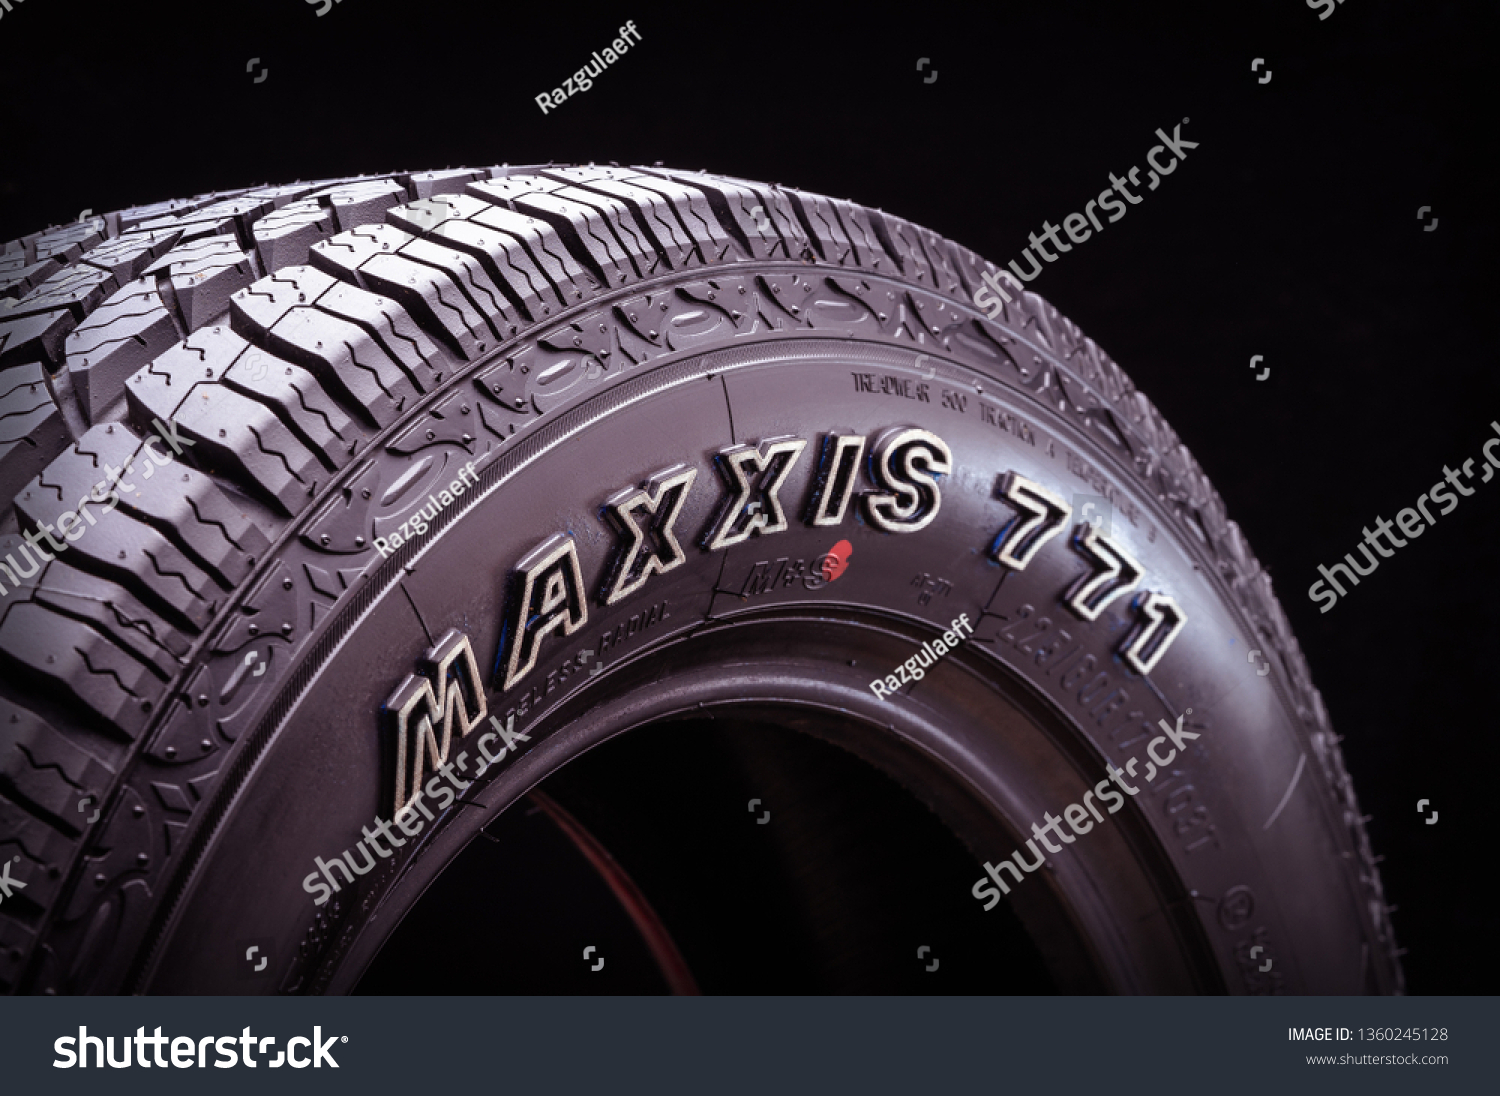 Шины maxxis 215 купить. Maxxis at-771 Bravo. Максис Браво 771 215/65 16. Maxxis at771 Bravo 215/65r16. Maxxis at771 104t.